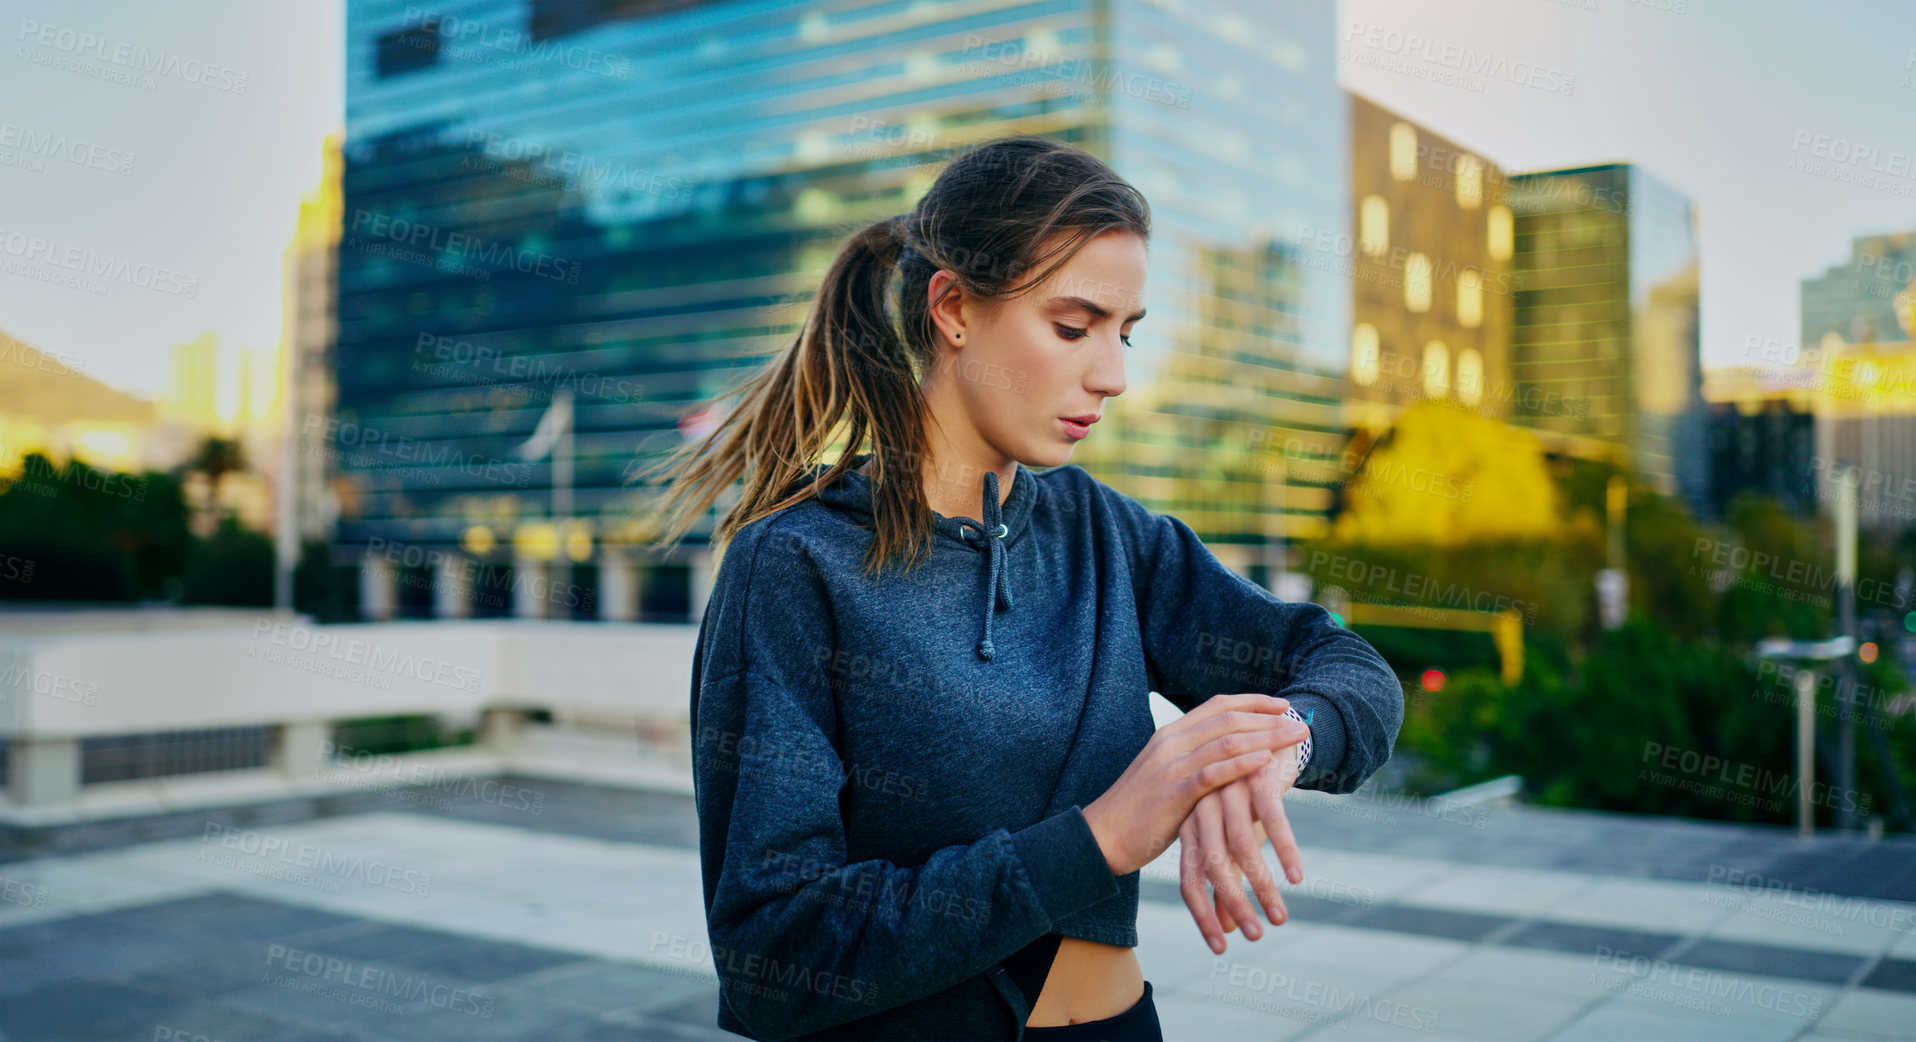 Buy stock photo Shot of a young woman looking at her watch while exercising in the city